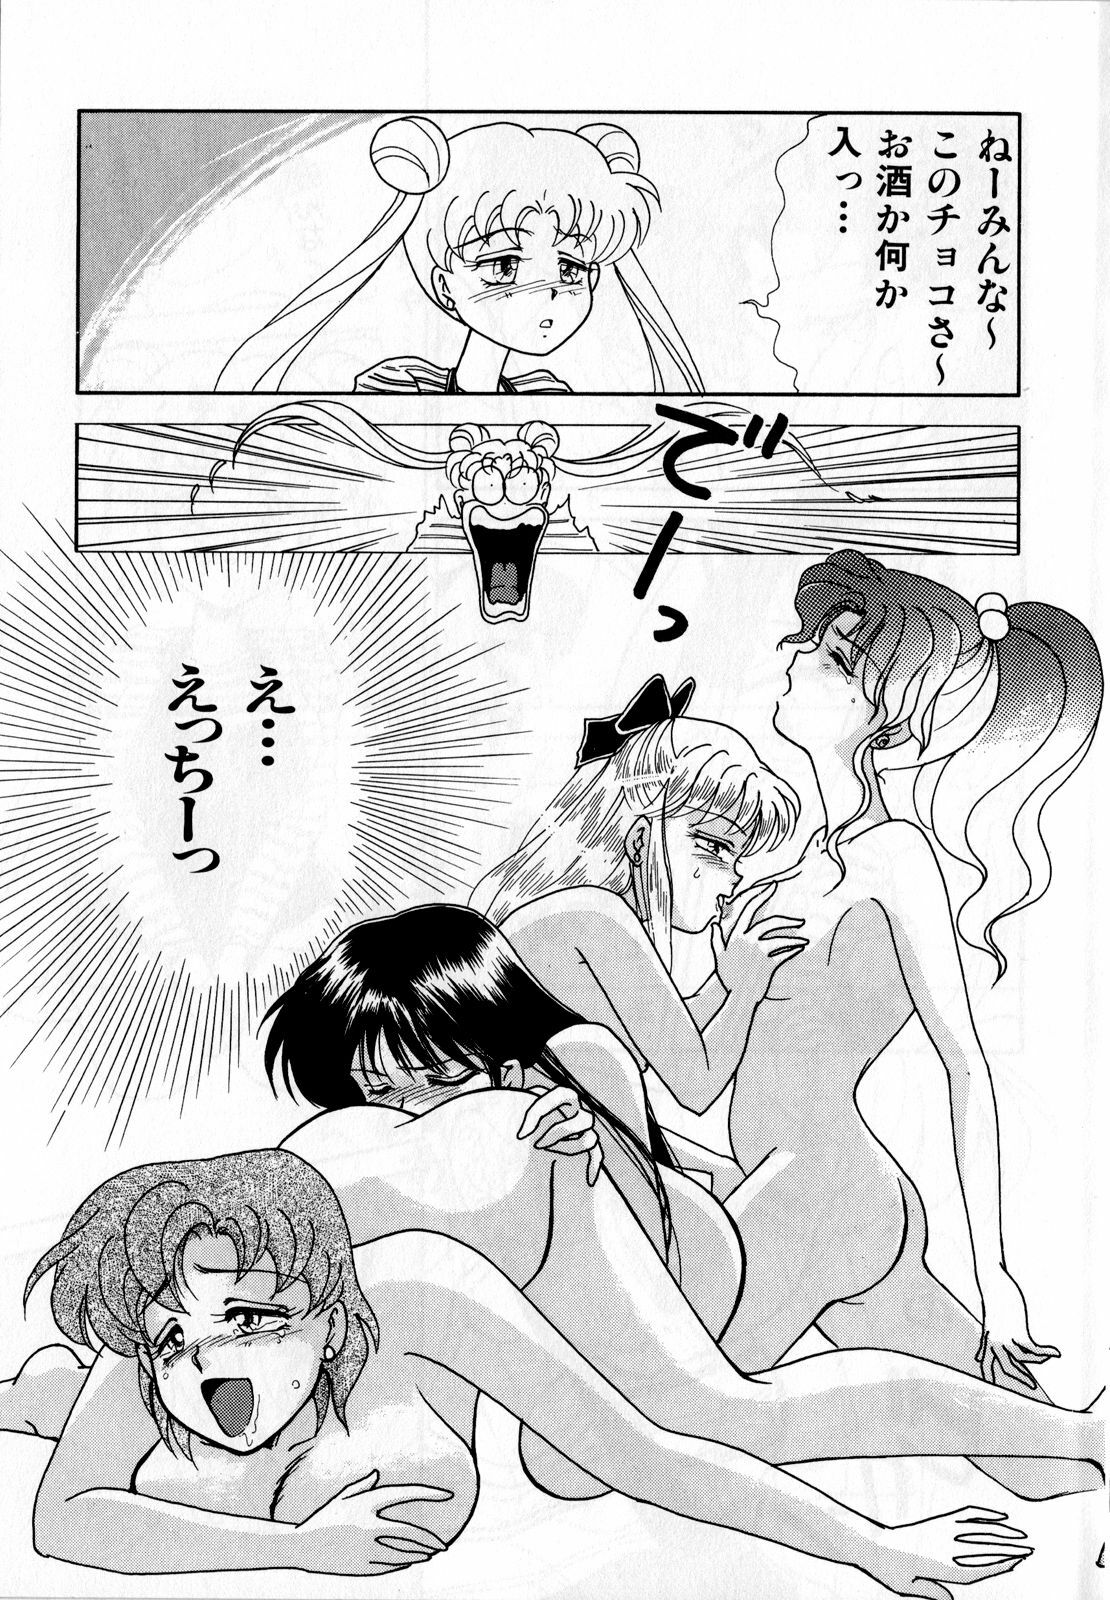 [Anthology] Lunatic Party 3 (Sailor Moon) page 10 full